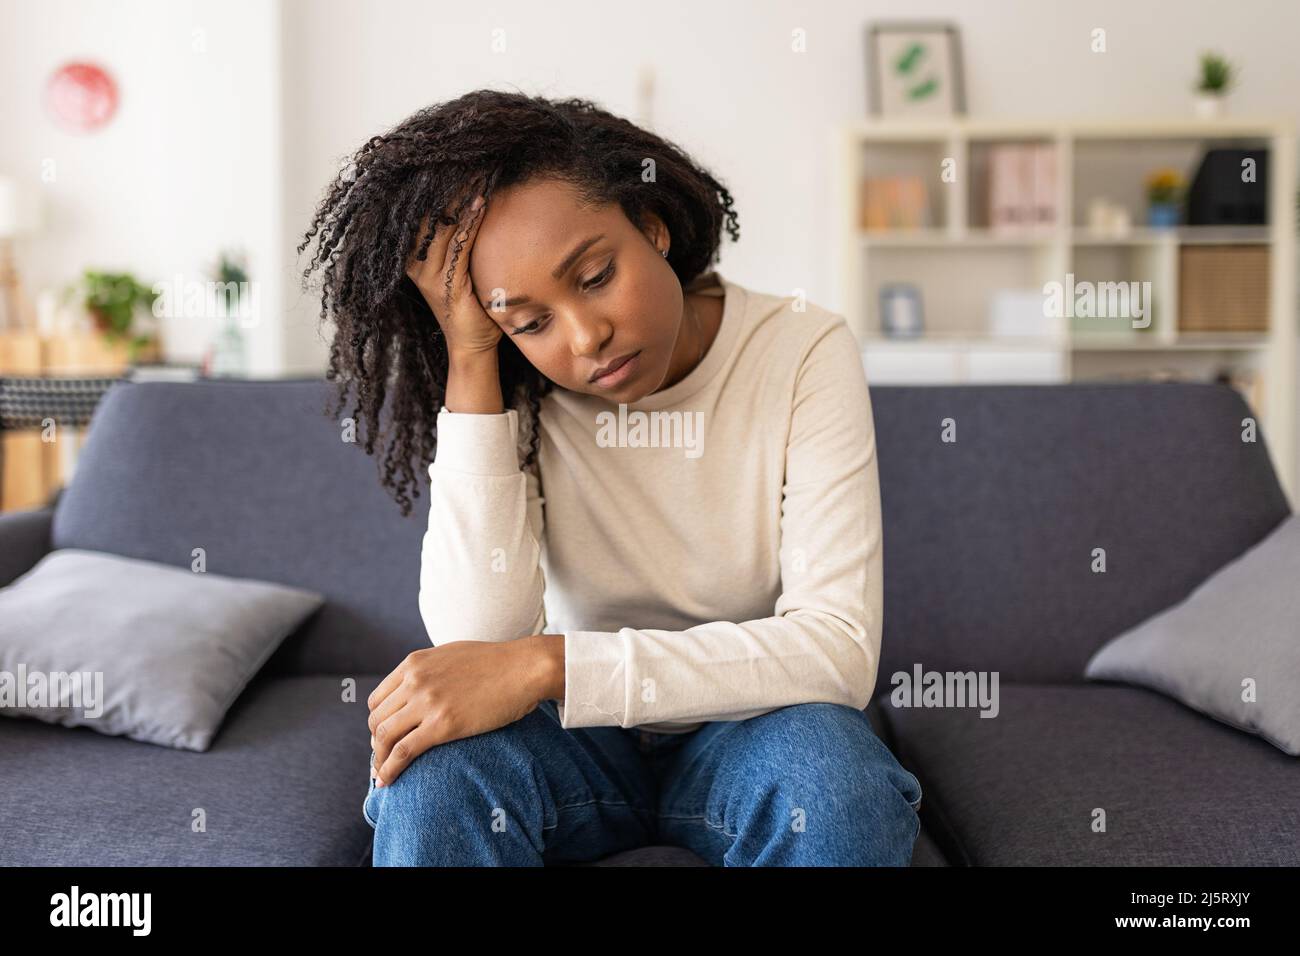 Sad woman thinking about her problems while sitting on a sofa at home Stock Photo